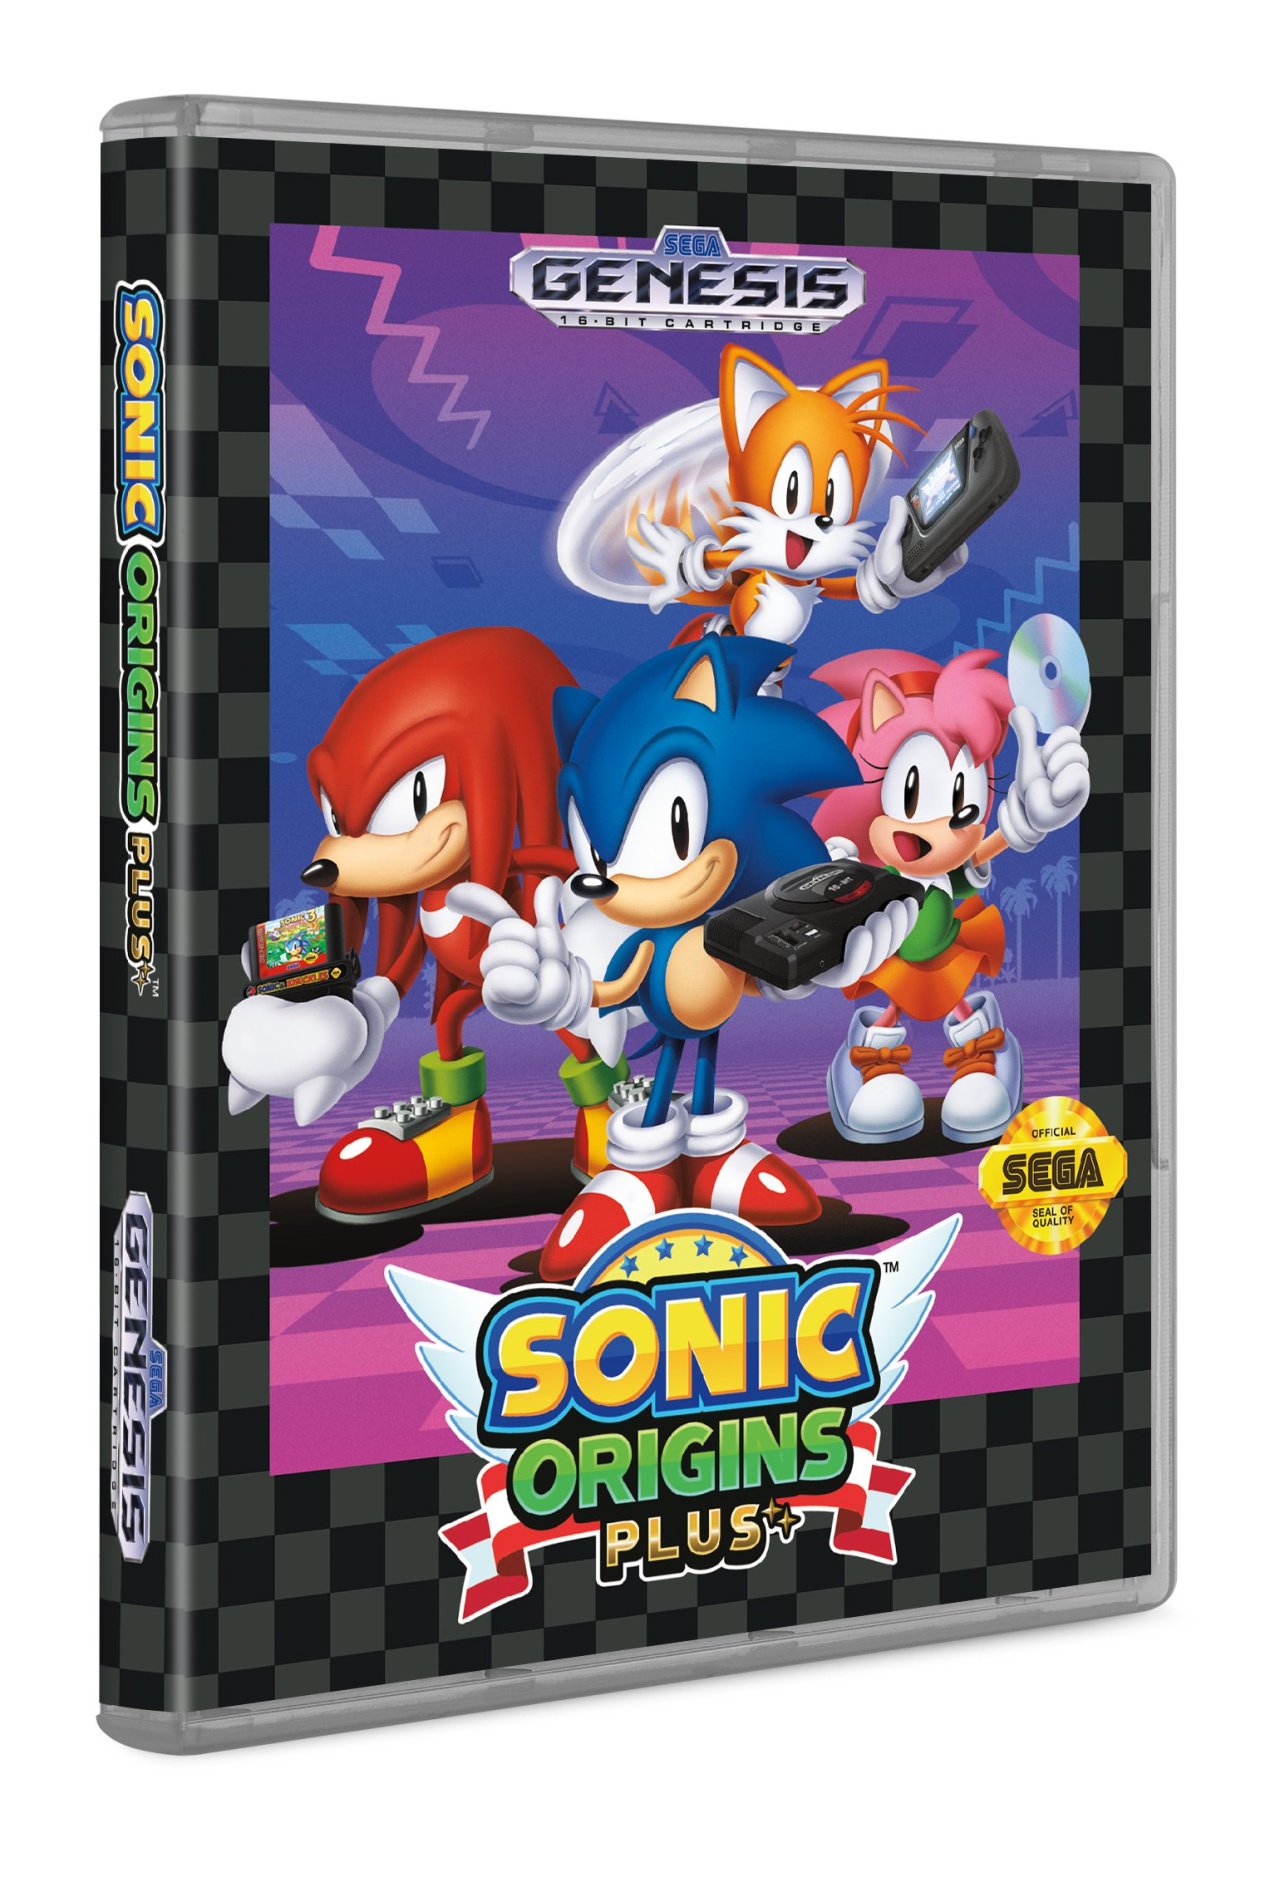 Sonic Origins Versions Guide: All you need to know about Sonic Origins